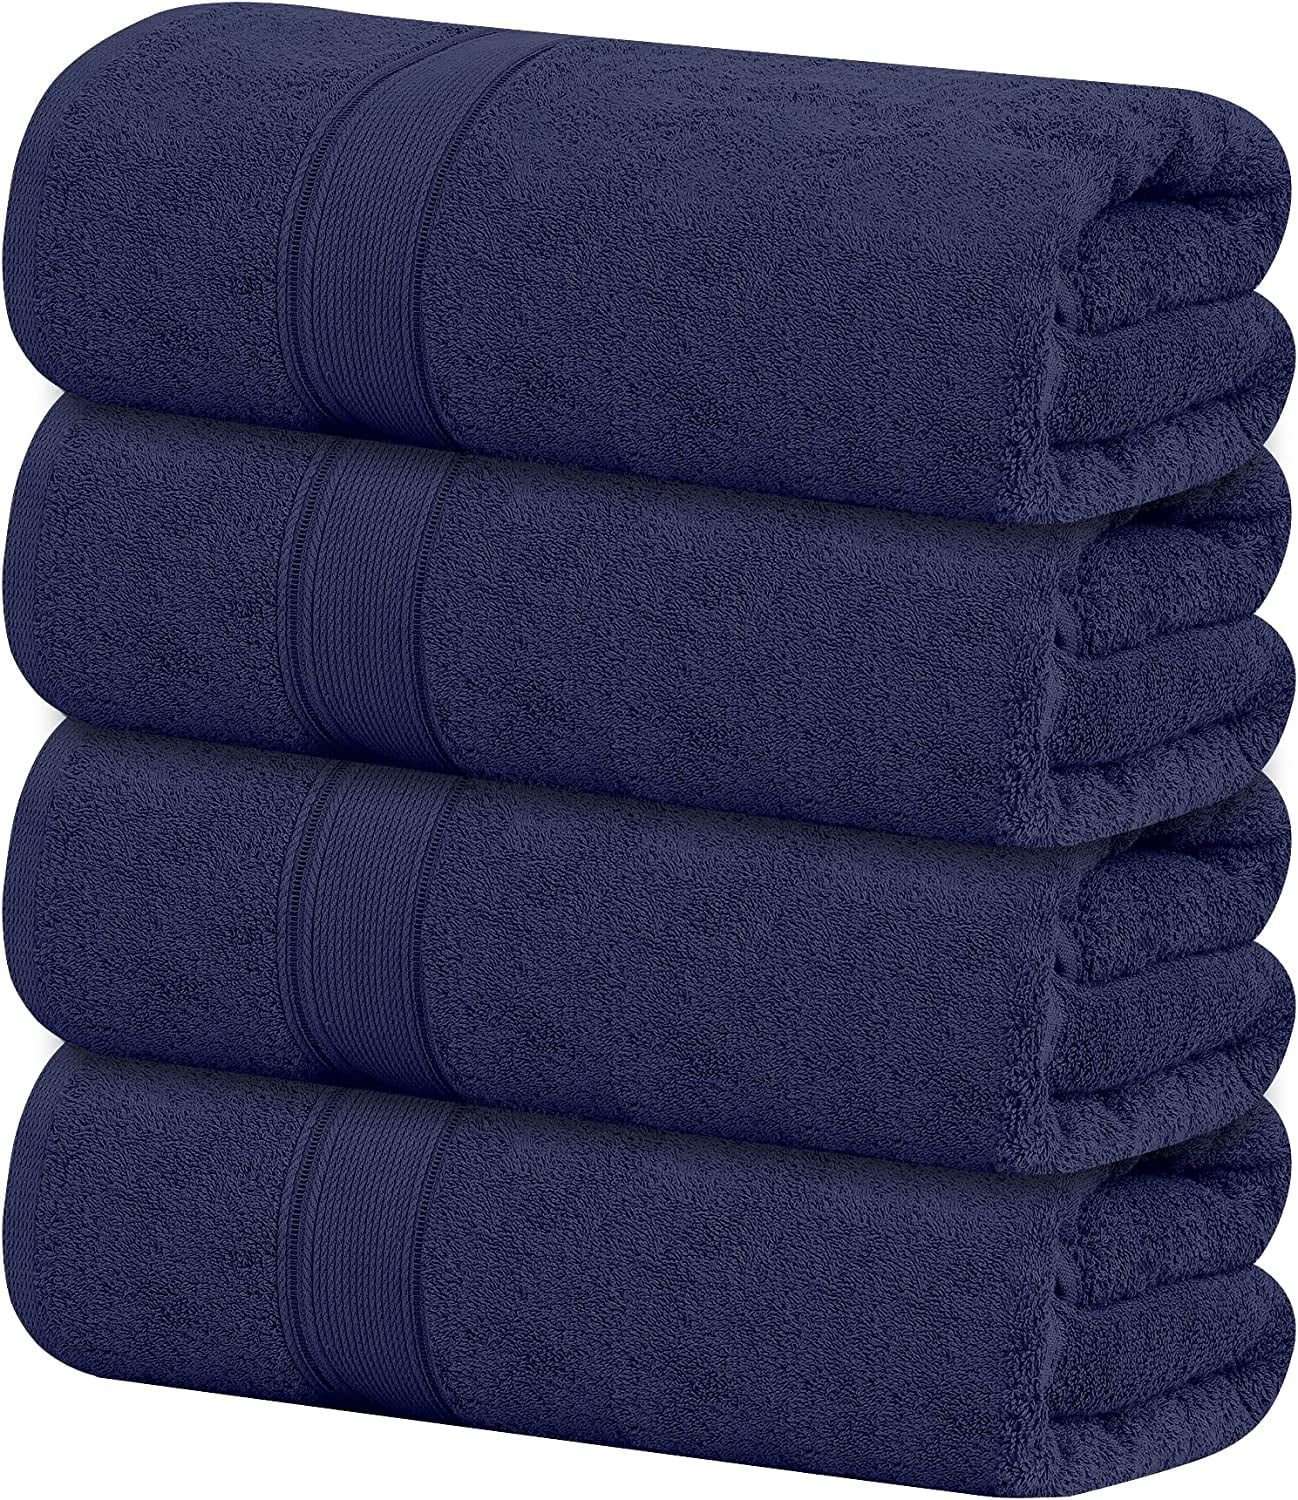 Tens Towels Large Bath Towels, 100% Cotton Towels, 30 x 60 Inches, Extra Large Bath Towels, Lighter Weight & Super Absorbent, Qu